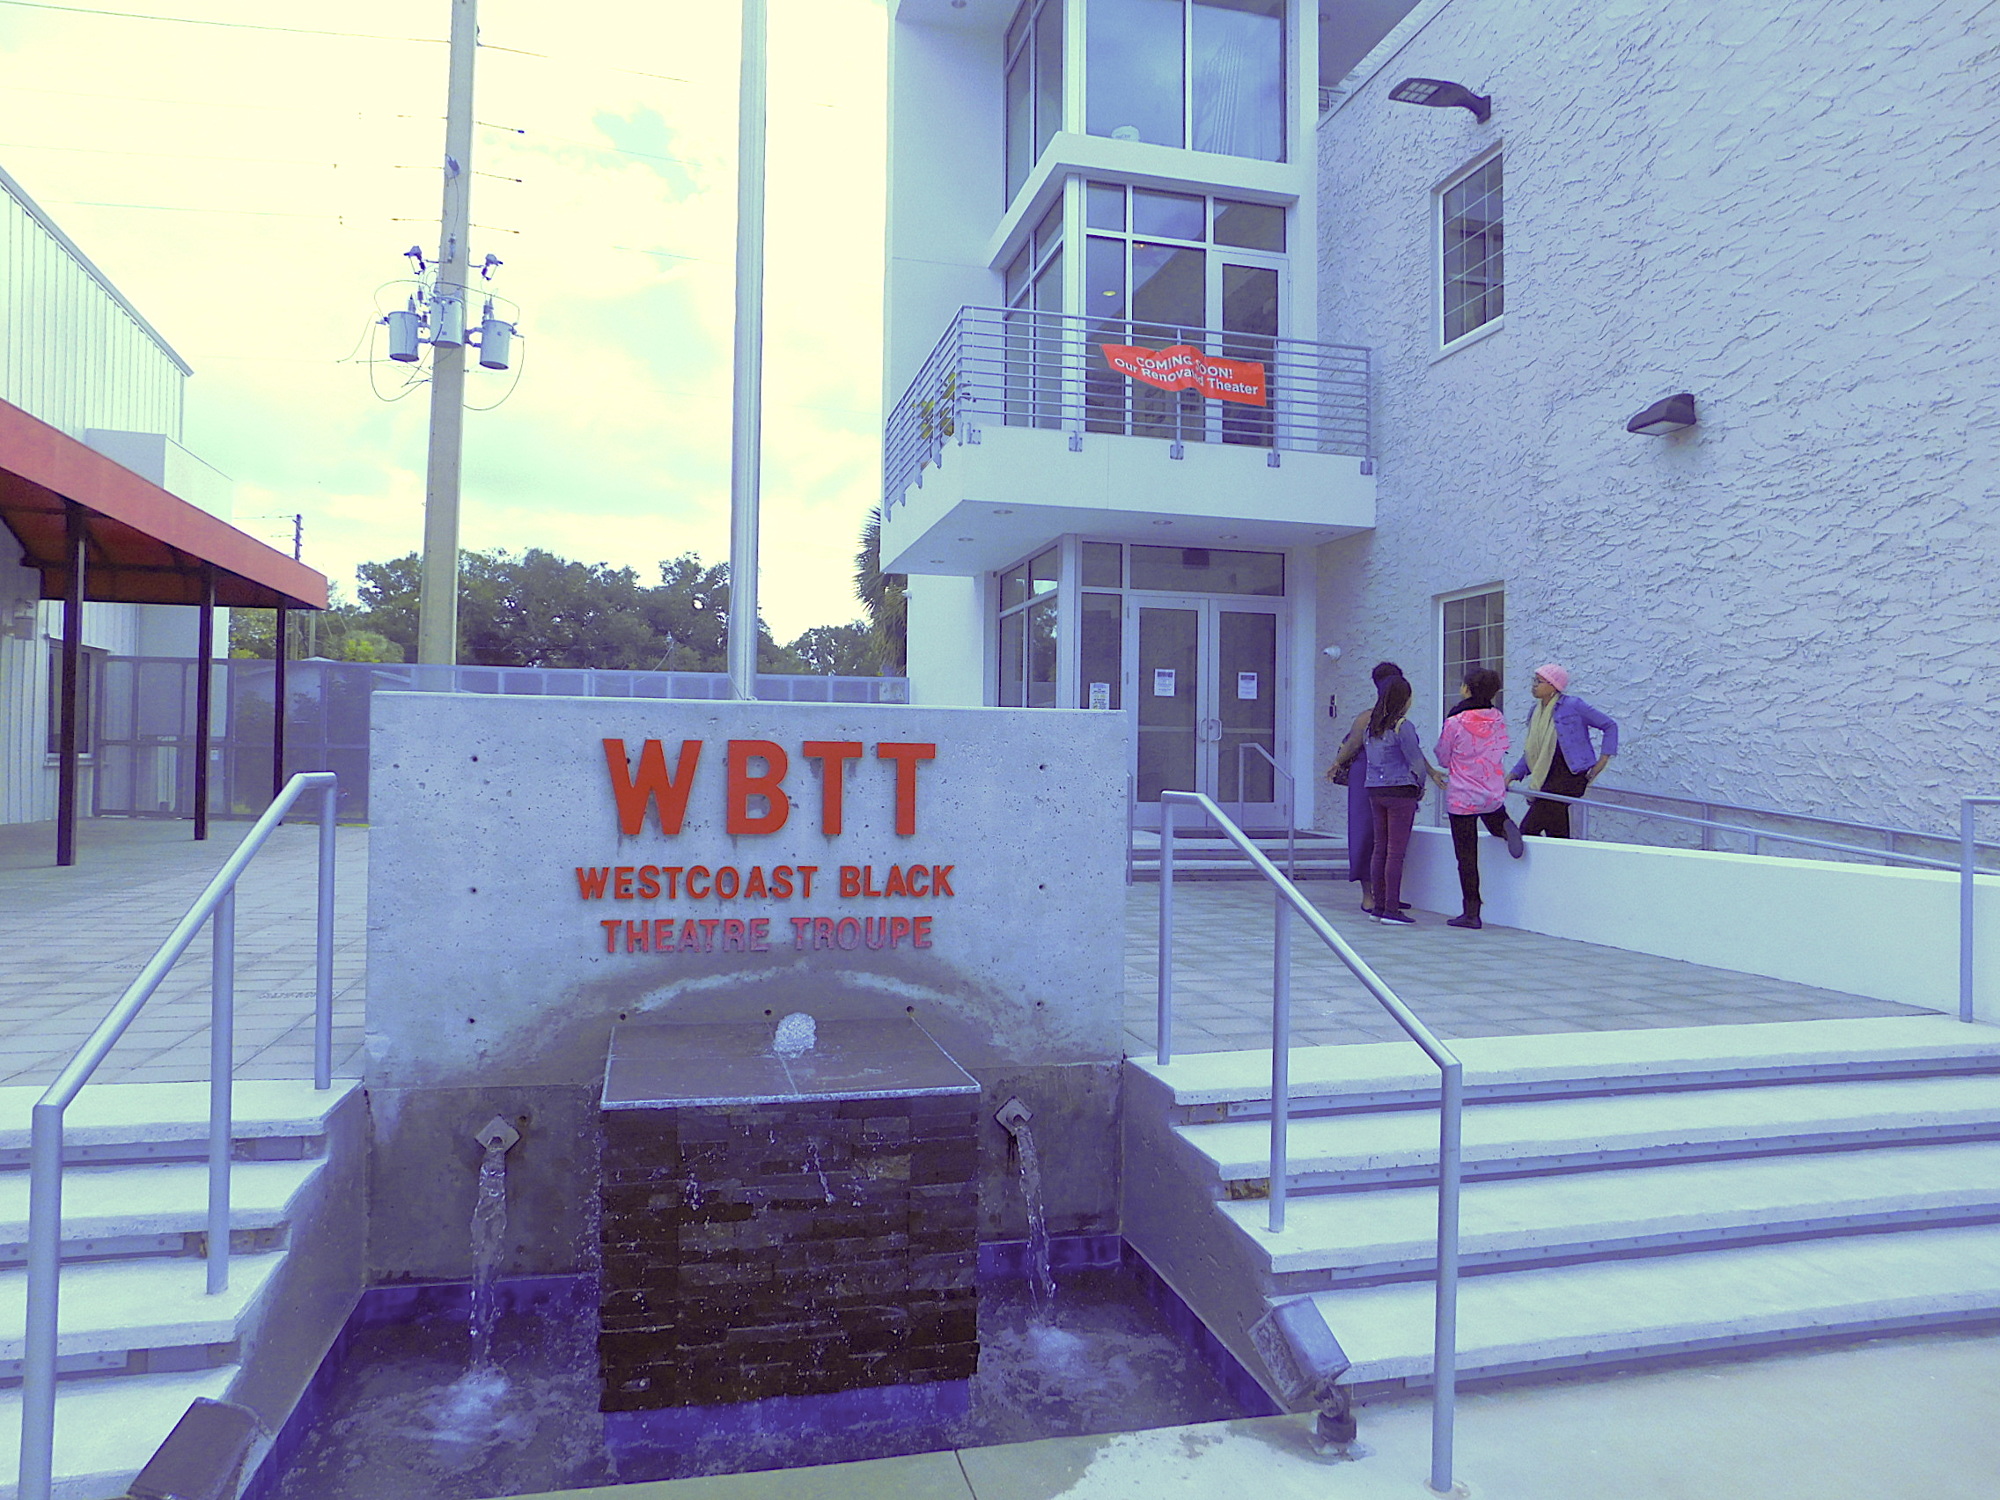 Patrons installed a fountain between the buildings at WBTT to make sure Nate Jacobs' name would always be in a prominent place.